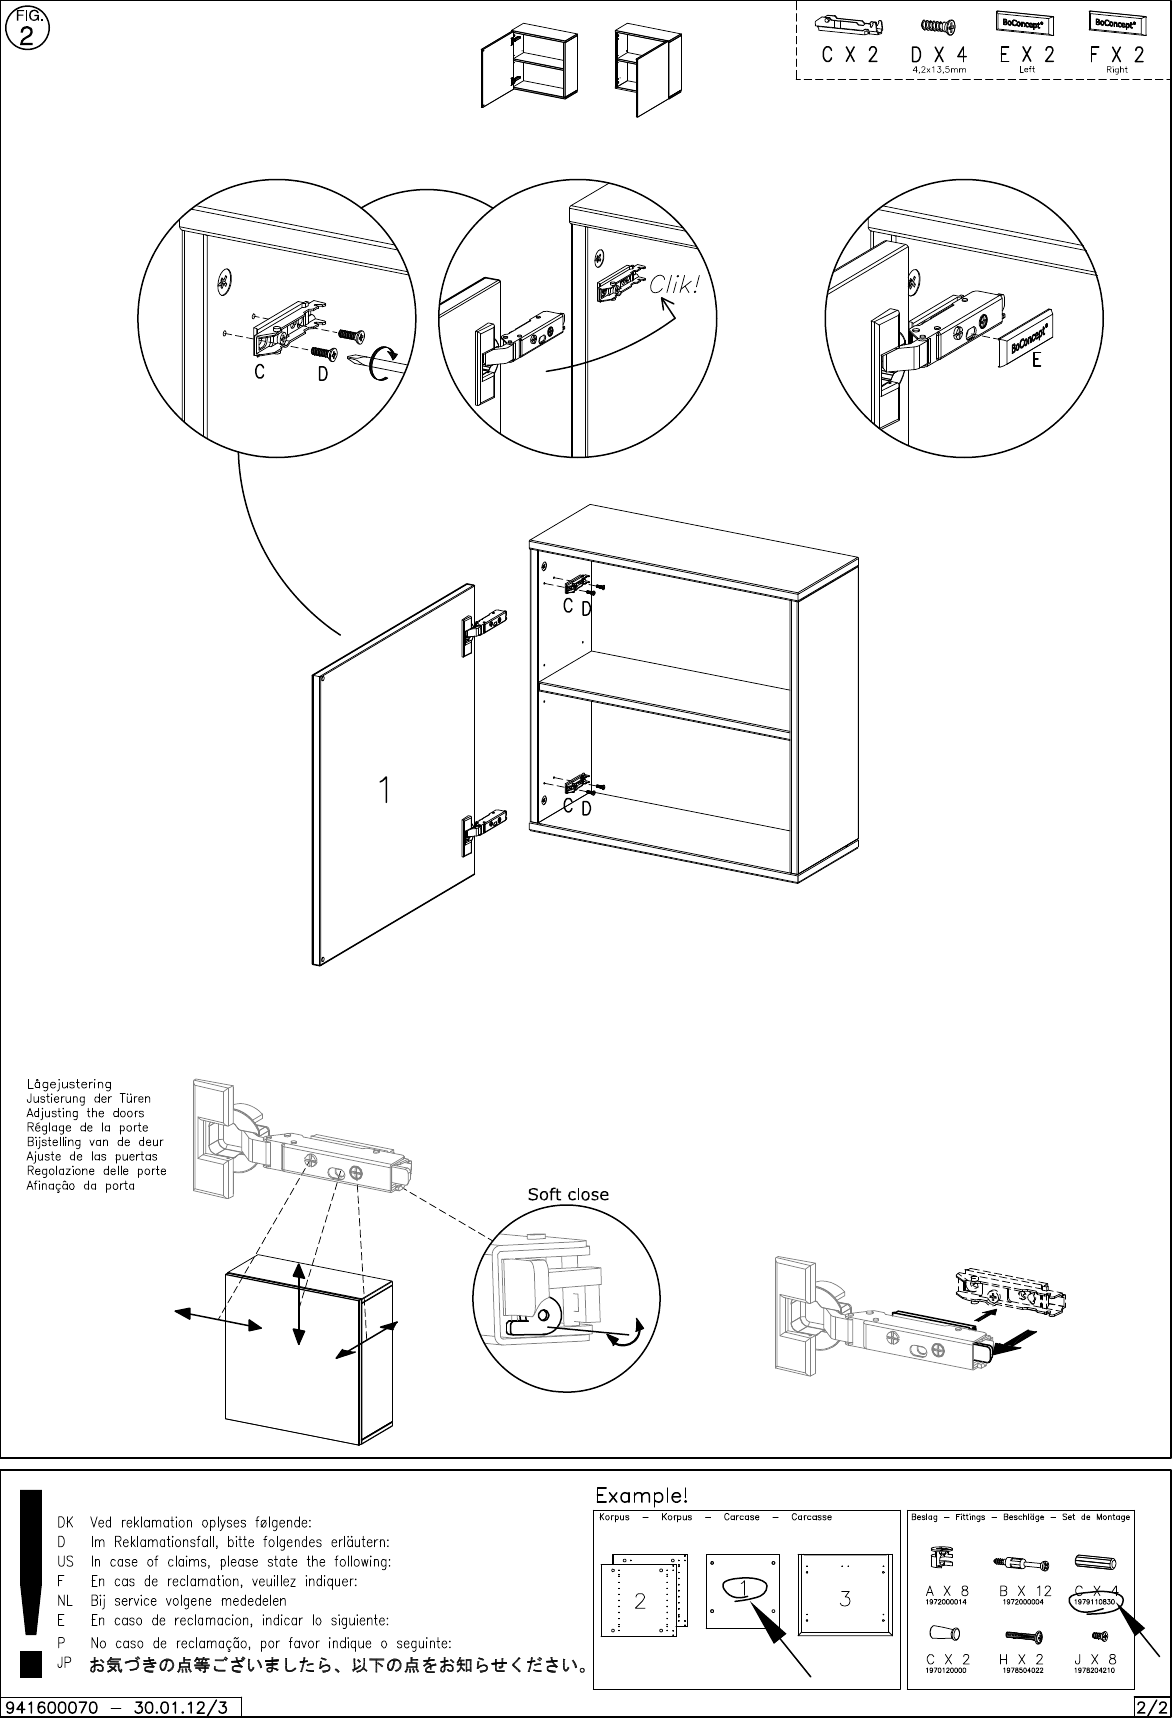 Page 2 of 2 - Boconcept Boconcept--70-Assembly-Instruction B:\DK_PTA_Share\Inventor Ation\360 Volani\Volani 0070\Assembly Instruction\941600070_v3_05